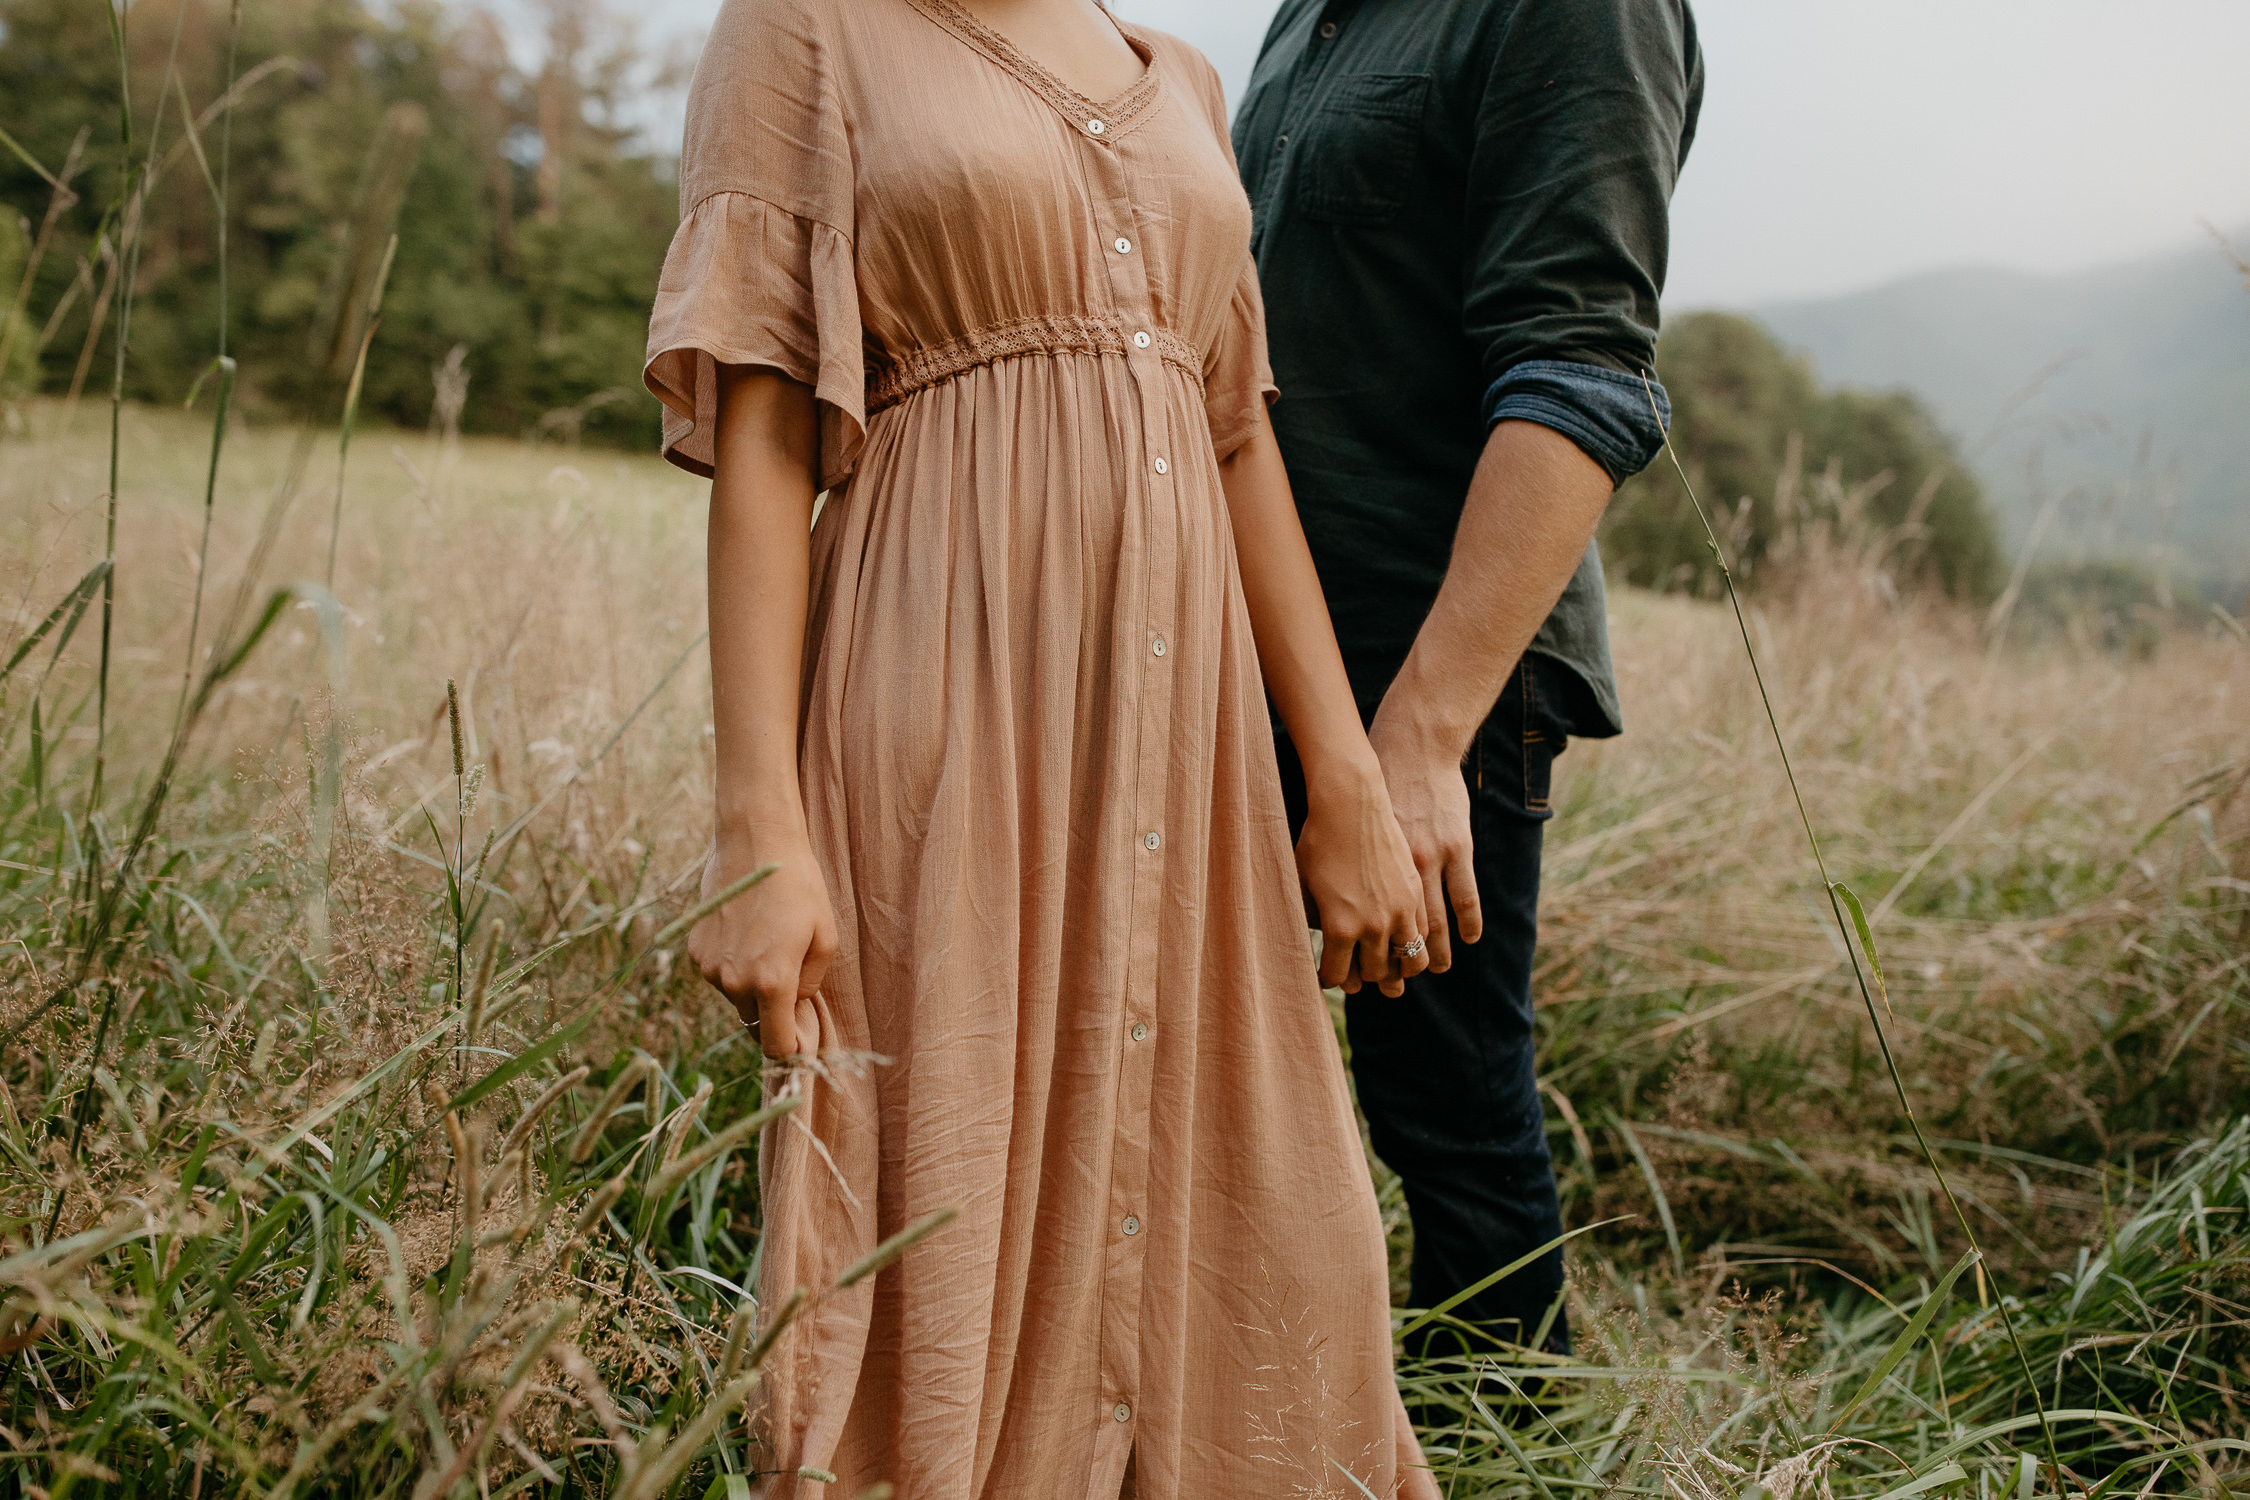 ariannamtorres and isaac engagement session at cades cove smoky mountains elopement-96.jpg